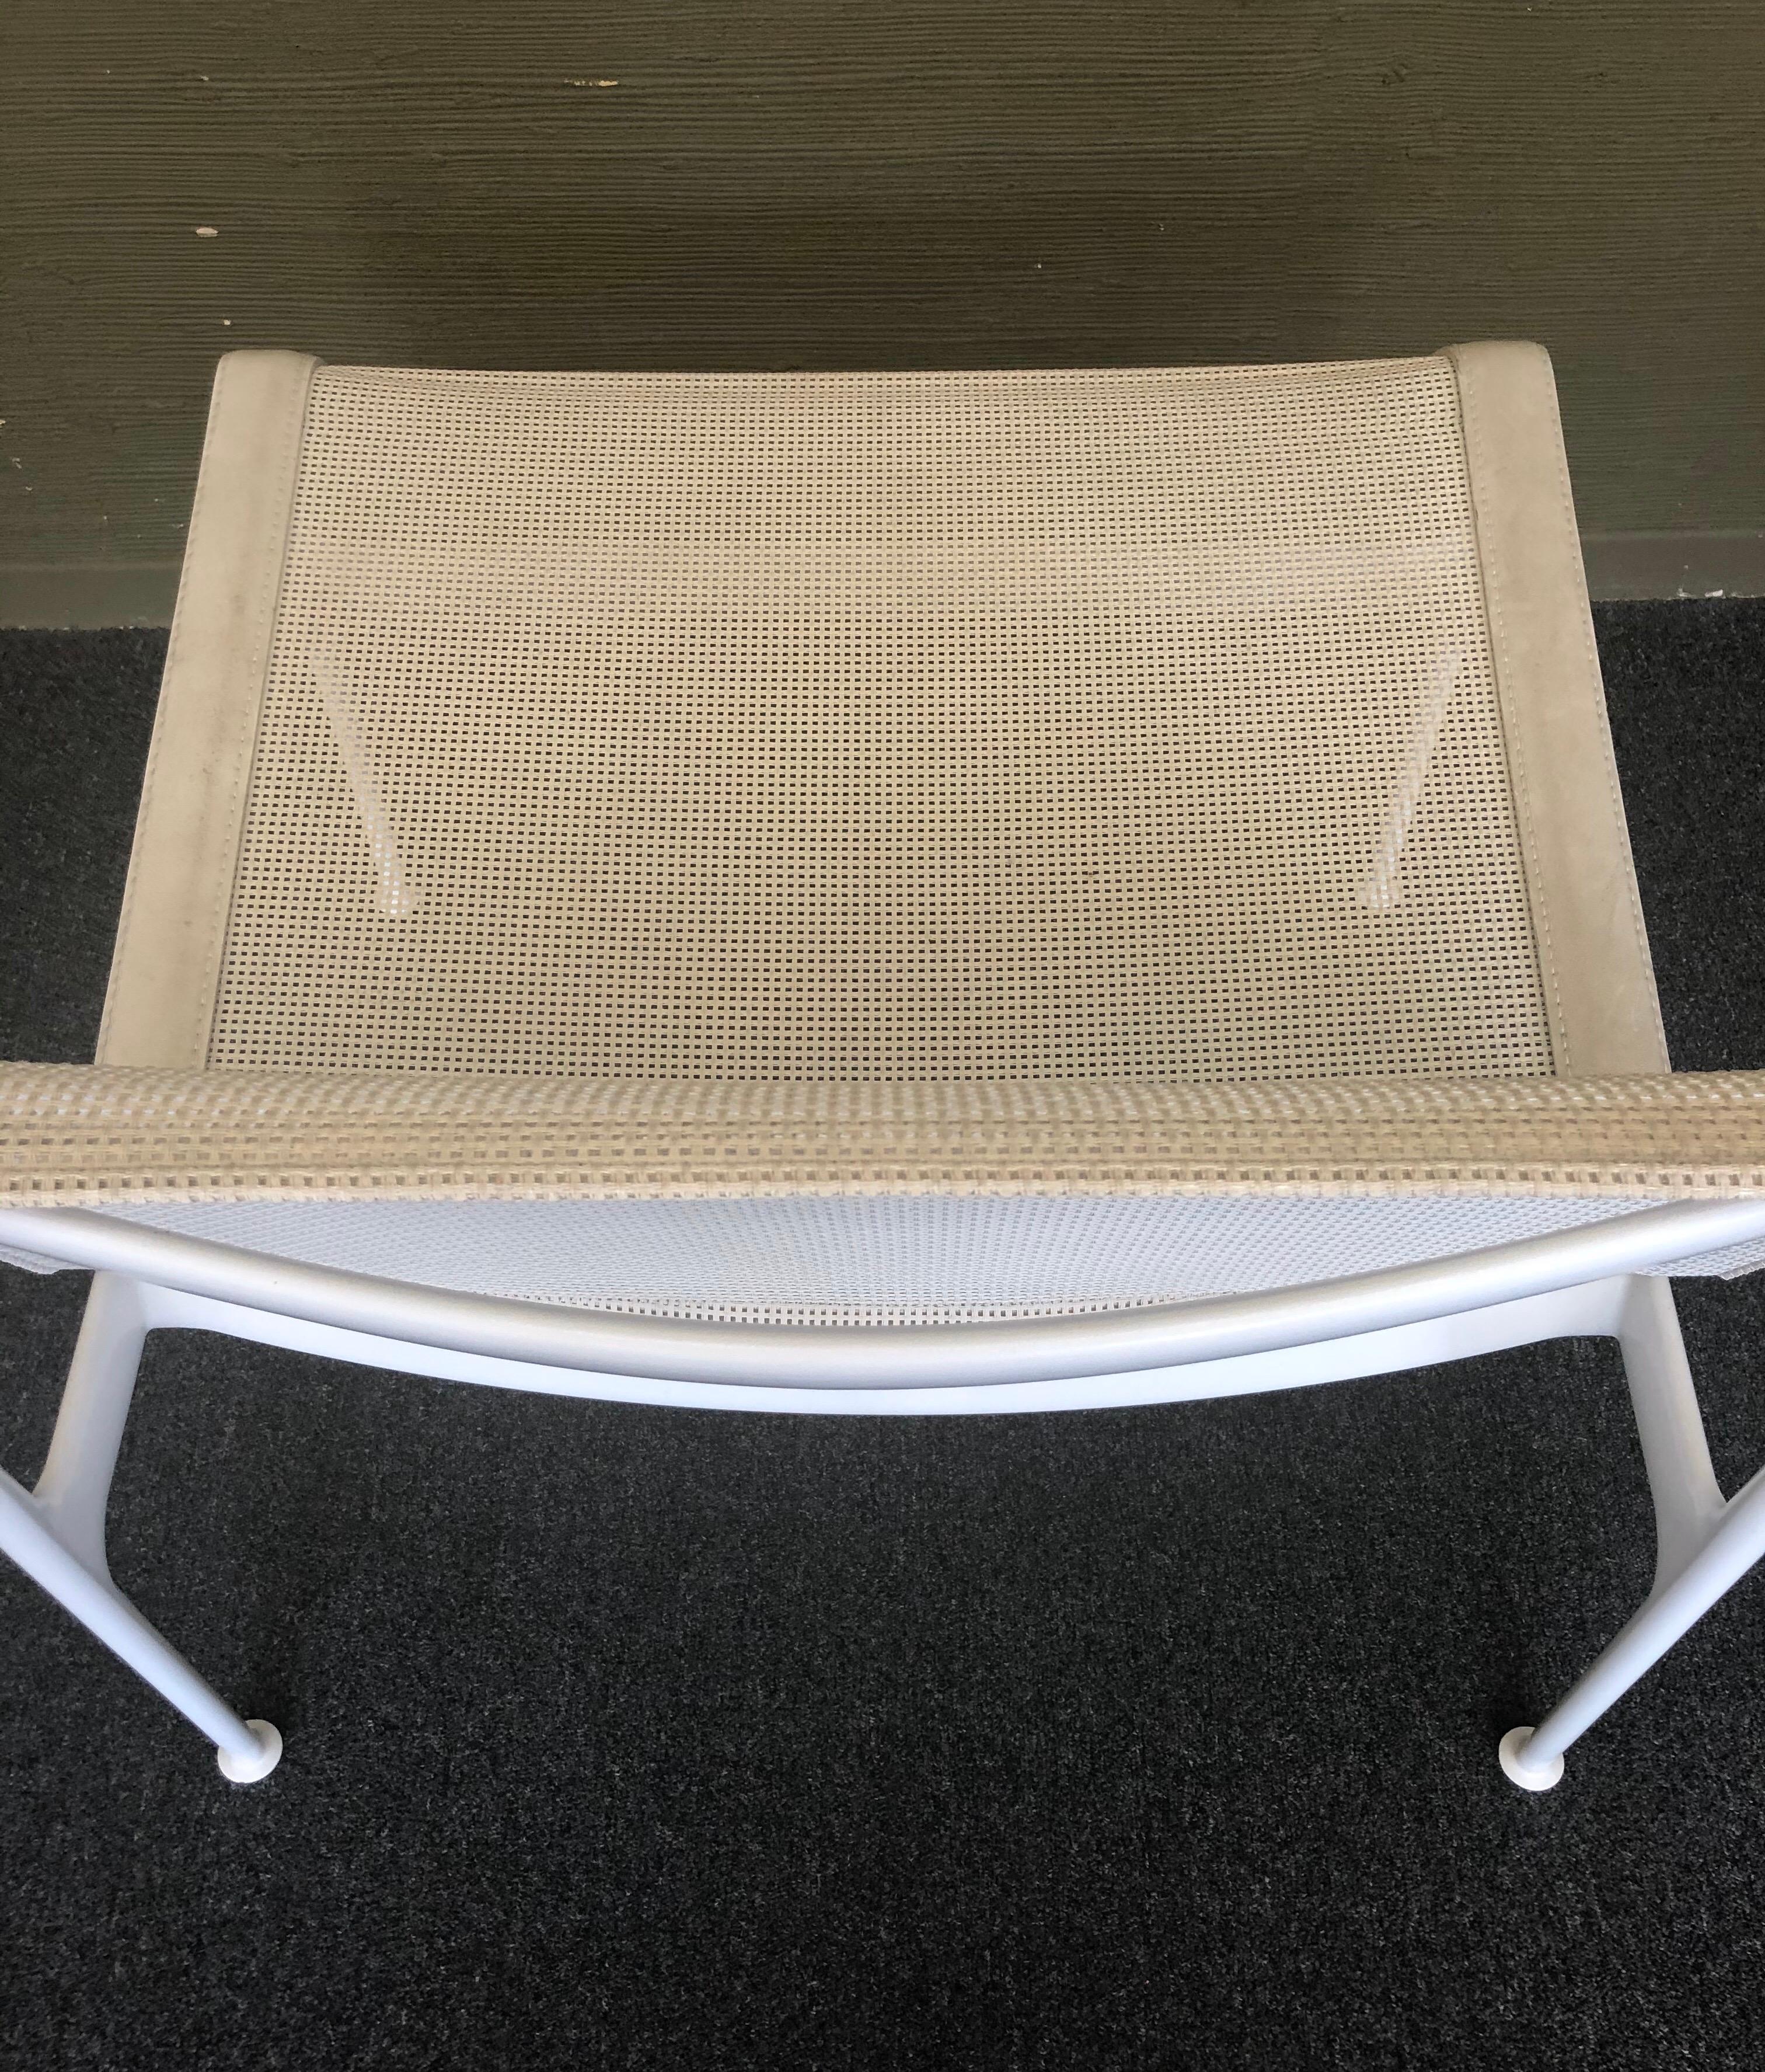 Pair of Lounge Chairs by Richard Schultz for Knoll 1966 Collection 2